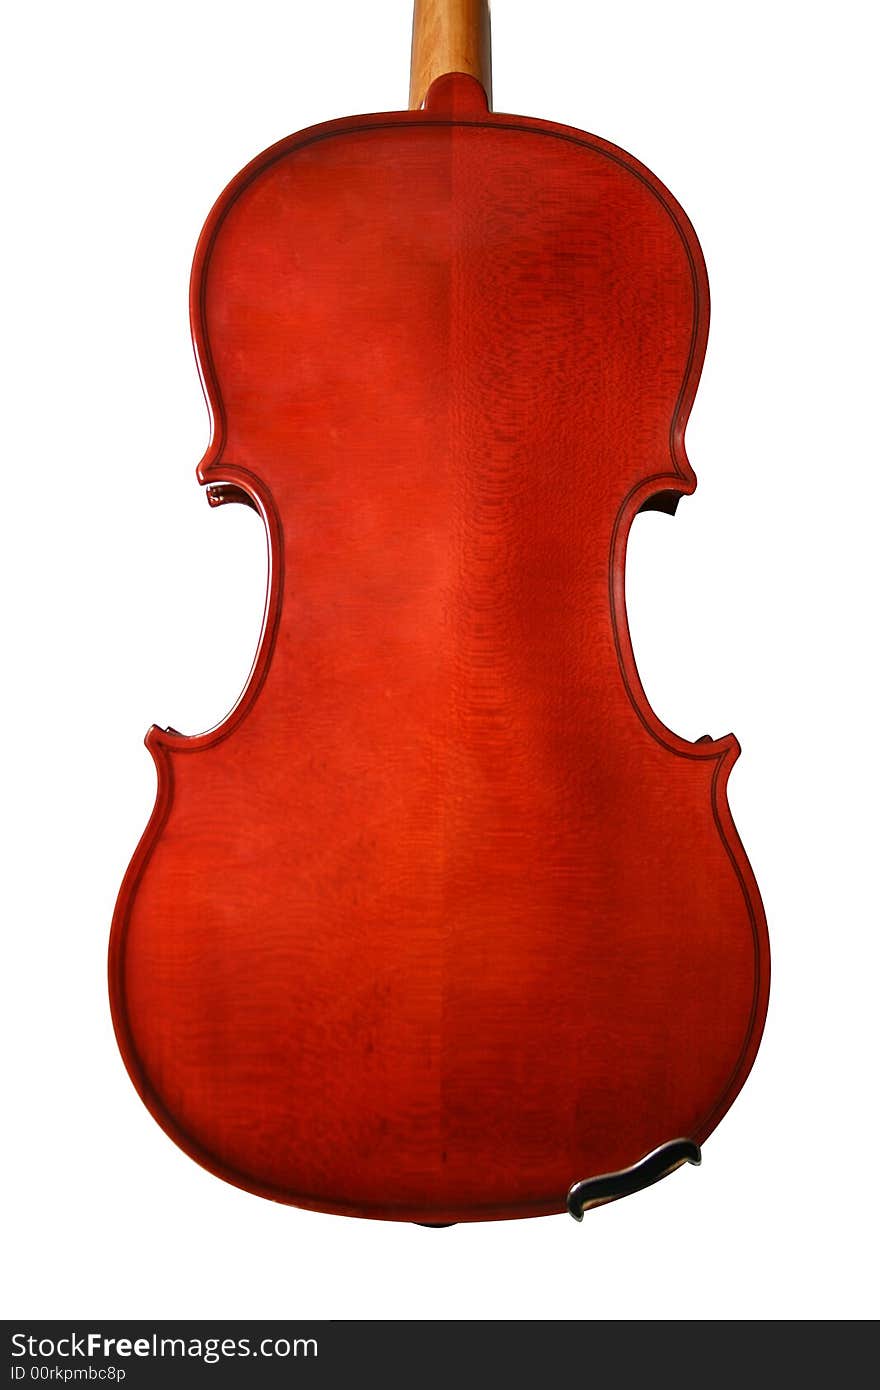 Violin isolated on a white background.